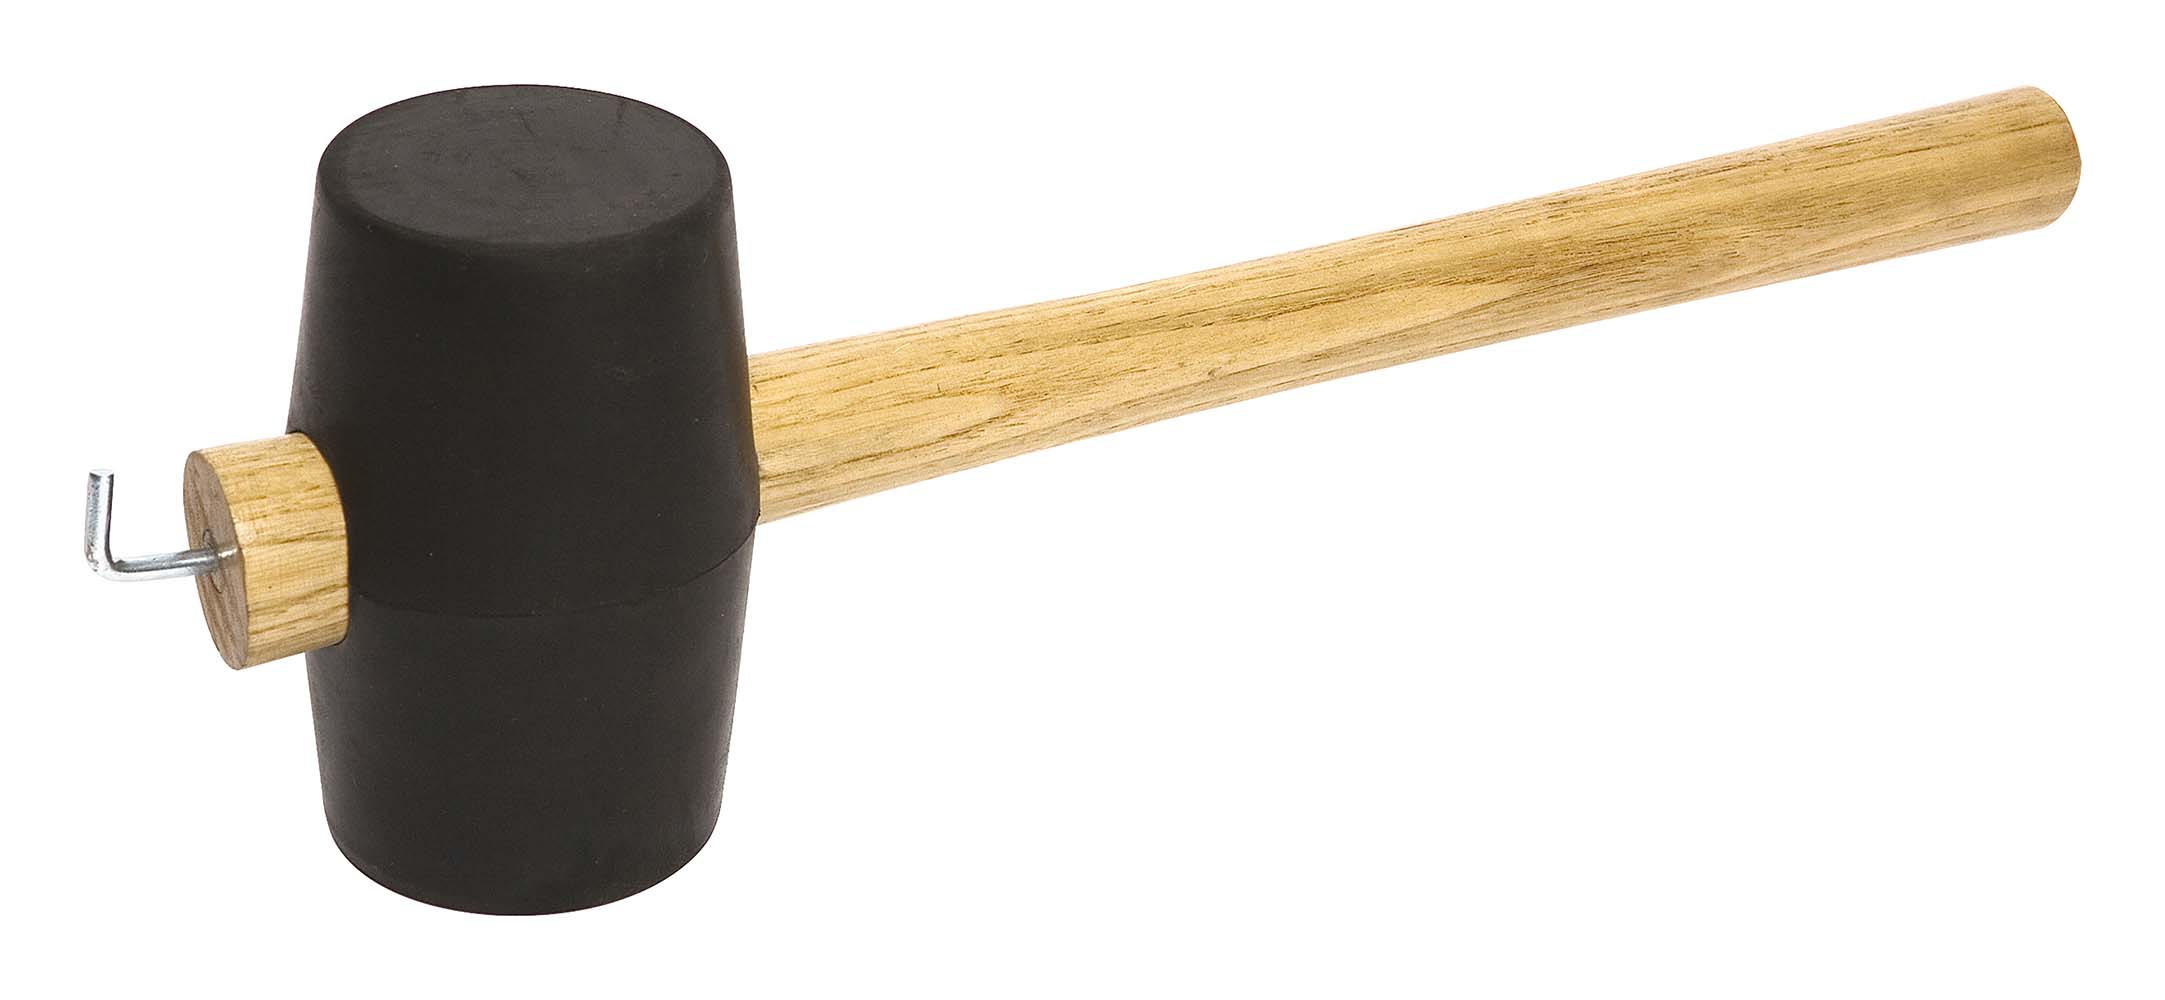 4114776 A solid rubber hammer. Equipped with a wooden handle with a strong reel at the end.